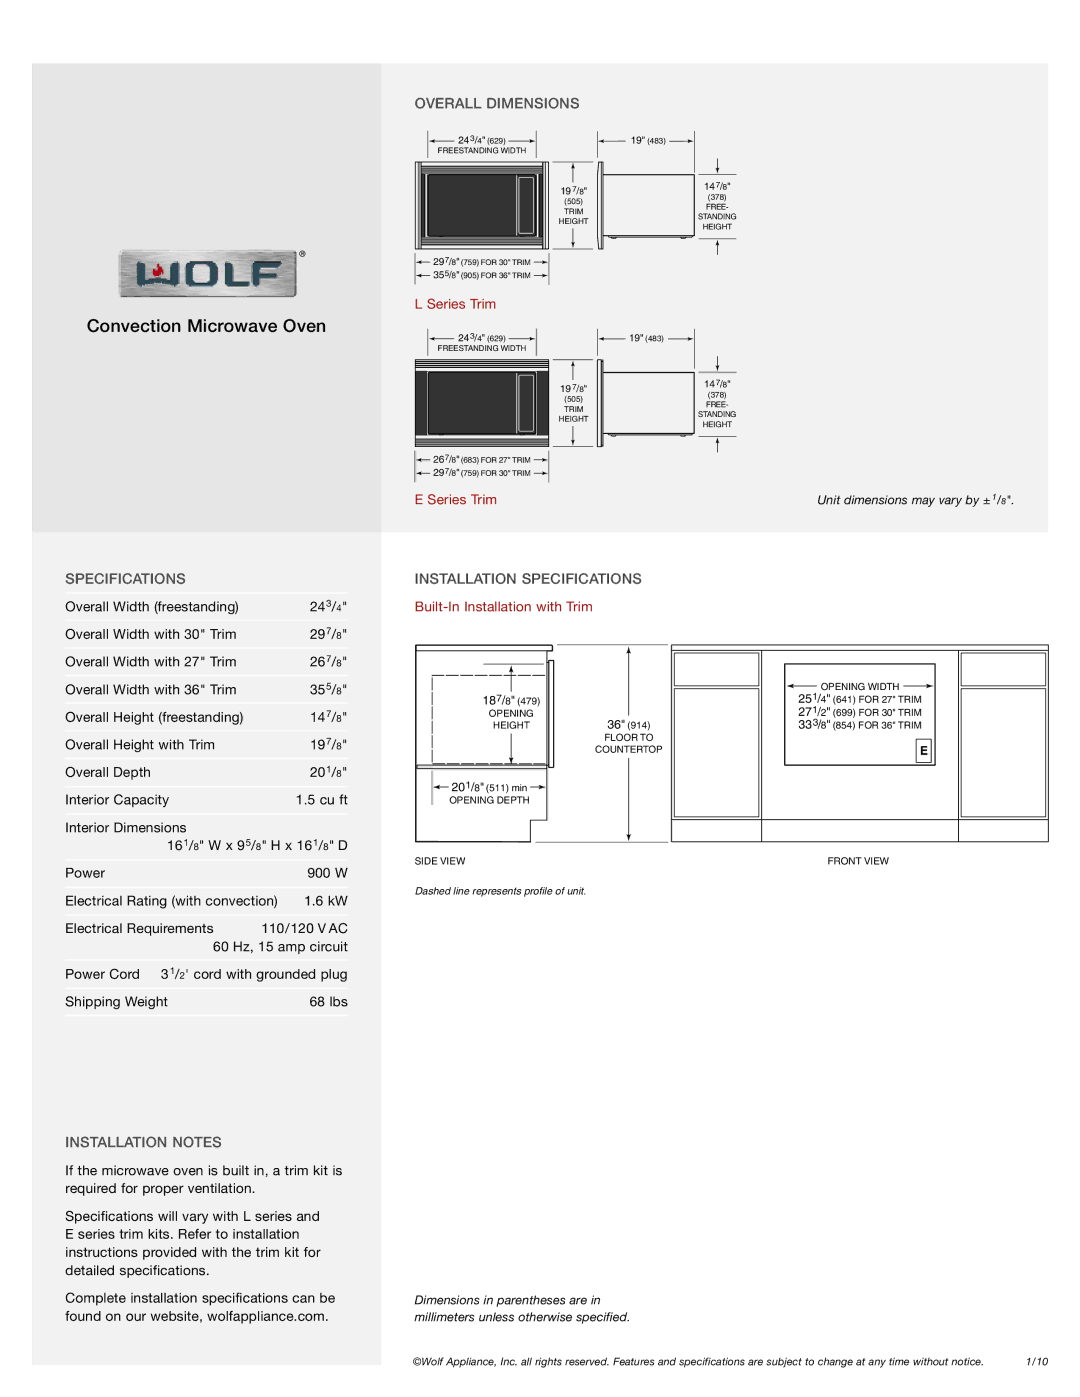 Wolf Microwave Oven manual Overall Dimensions, Installation Specifications, Installation Notes 